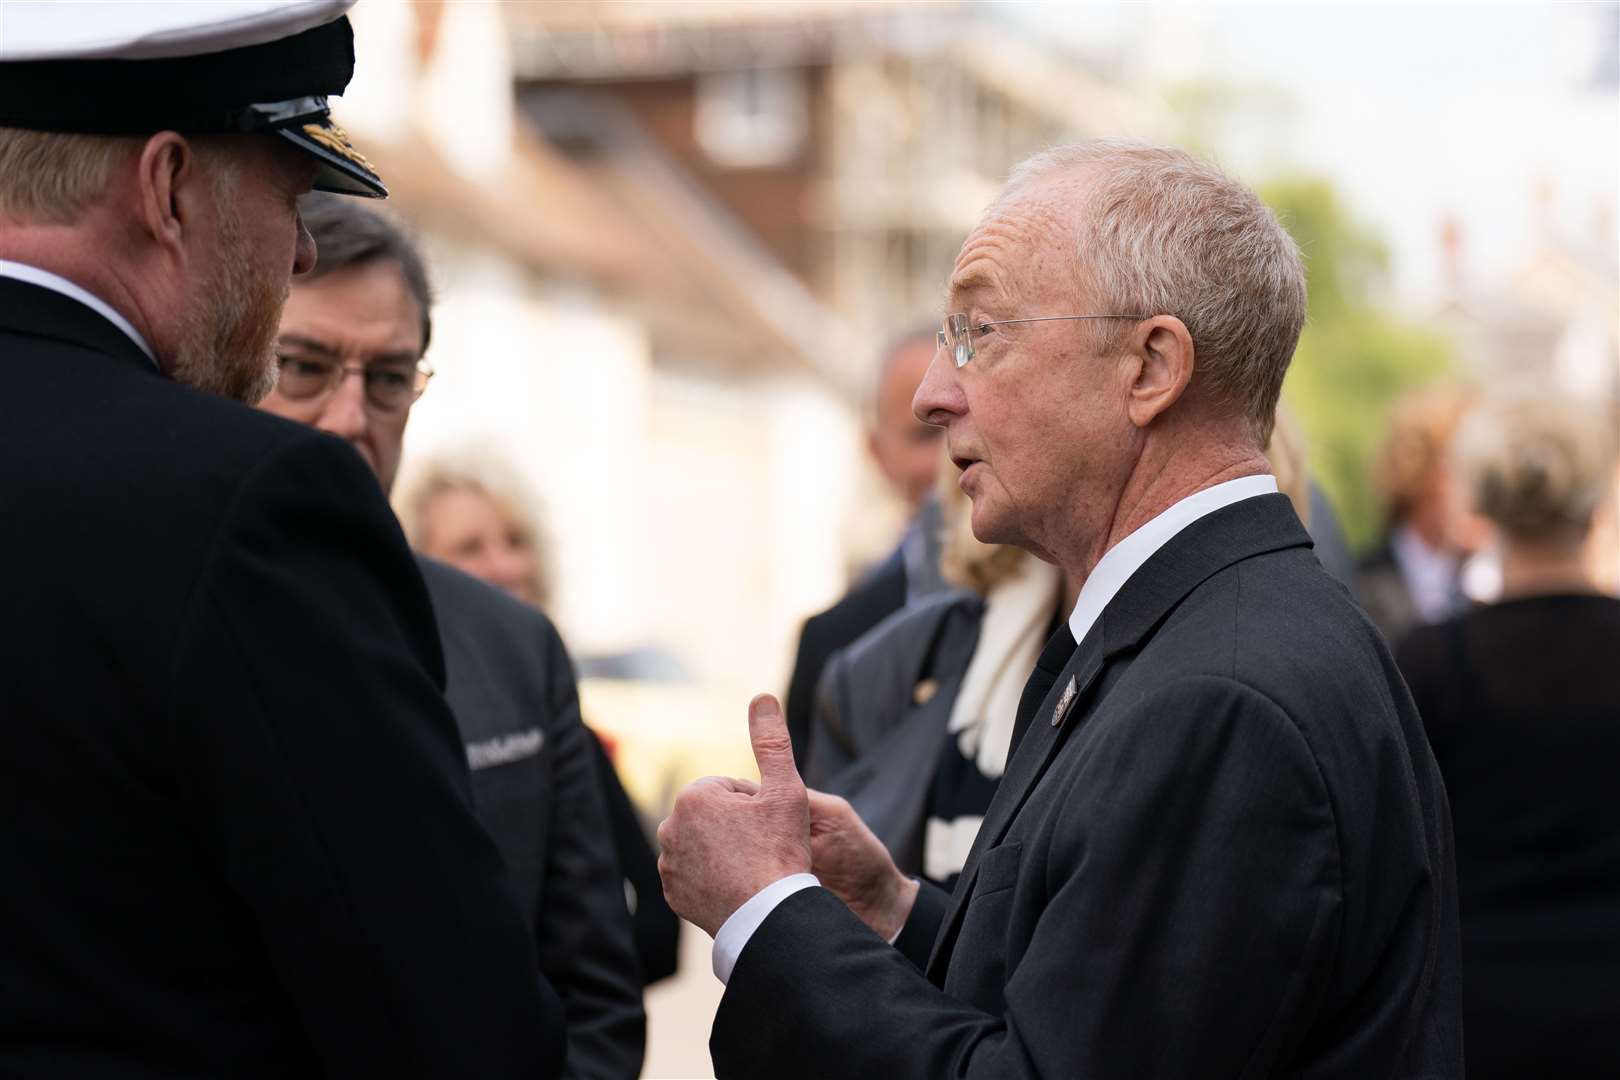 BBC reporter Nicholas Witchell was at the funeral (Joe Giddens/PA)